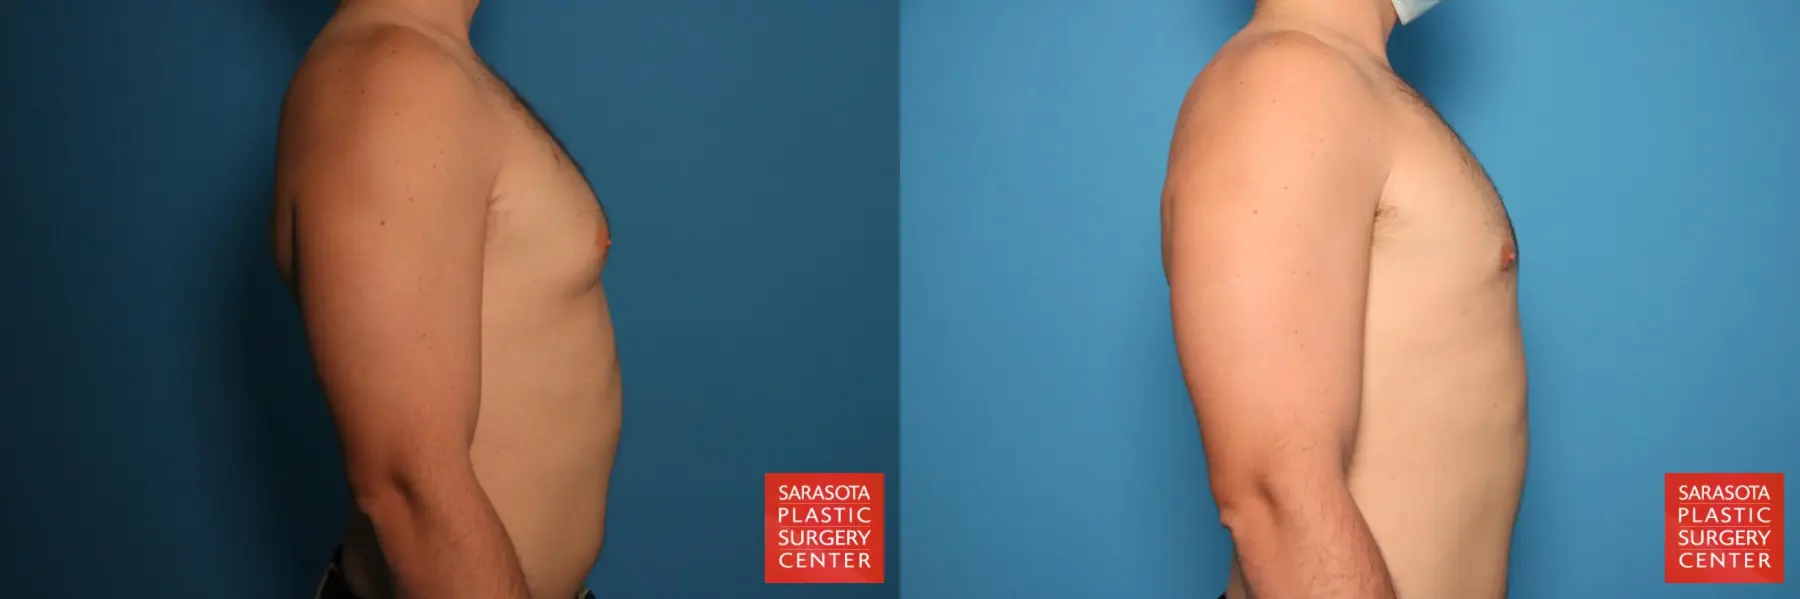 Gynecomastia: Patient 4 - Before and After 5